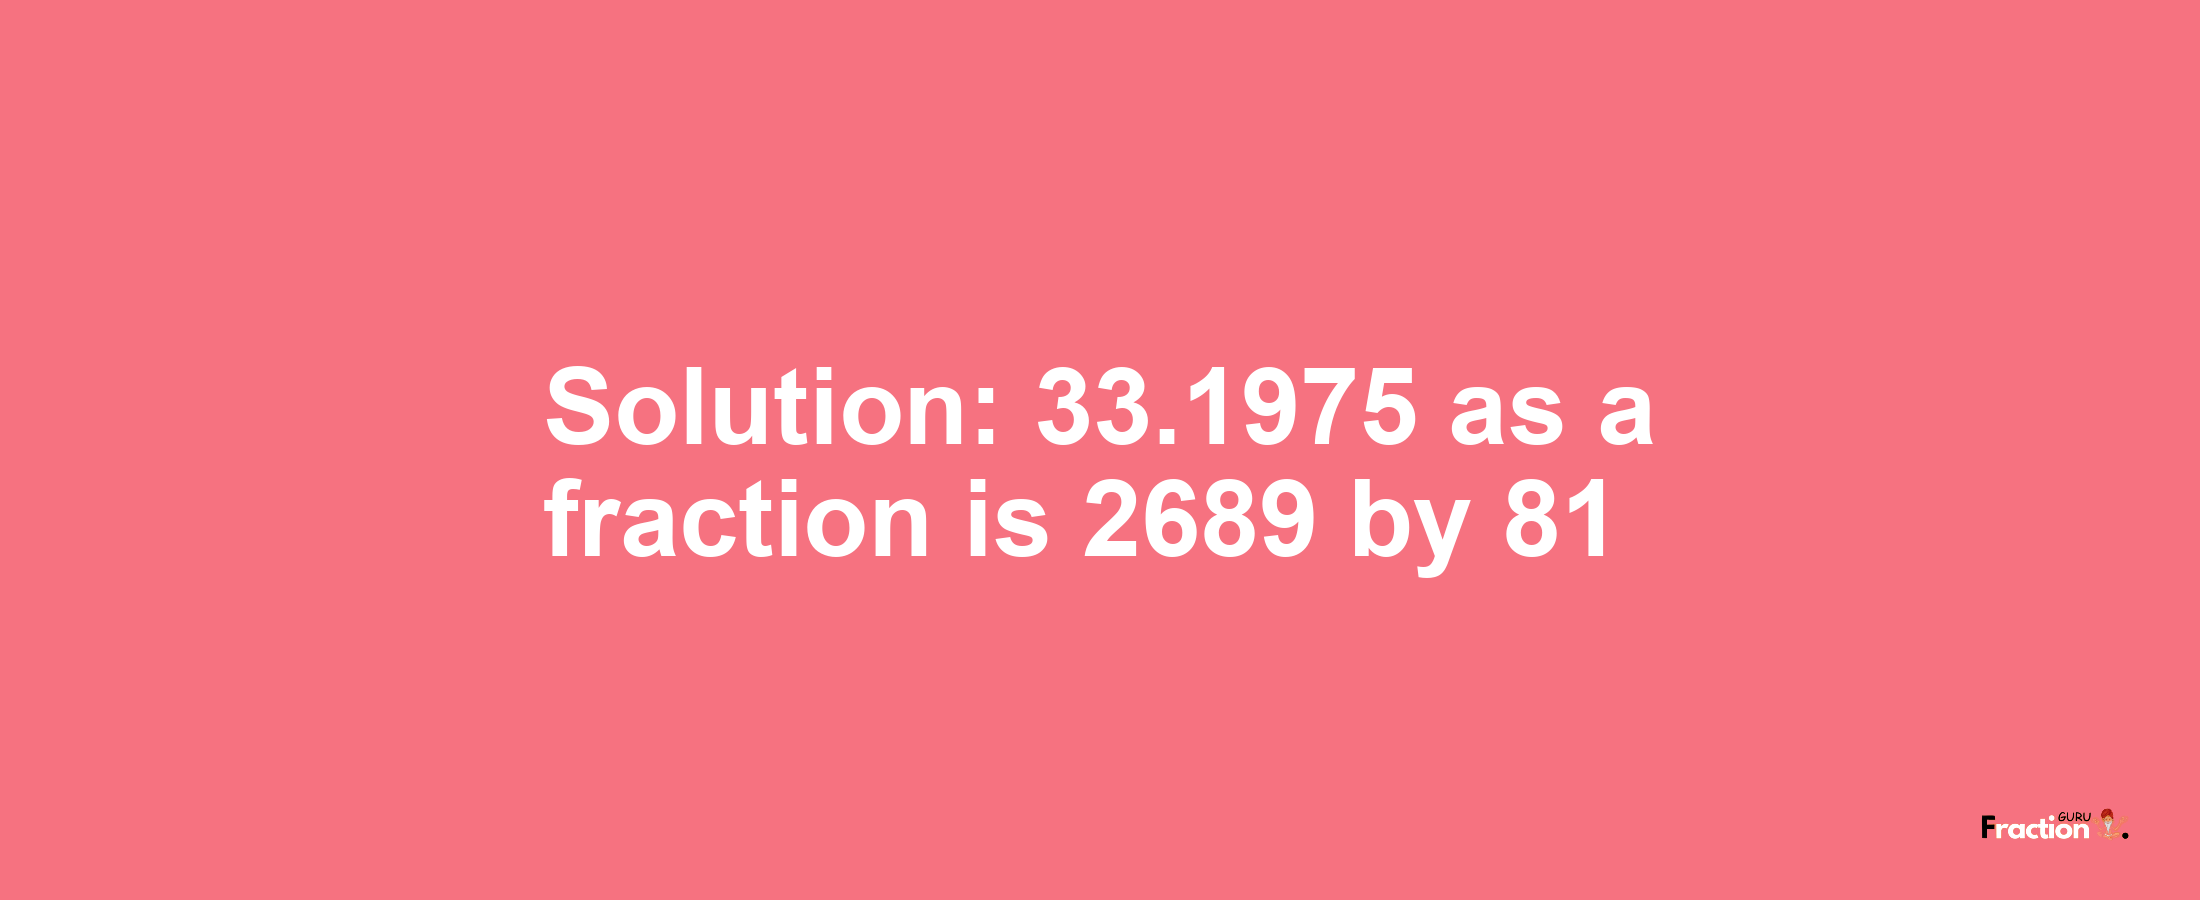 Solution:33.1975 as a fraction is 2689/81